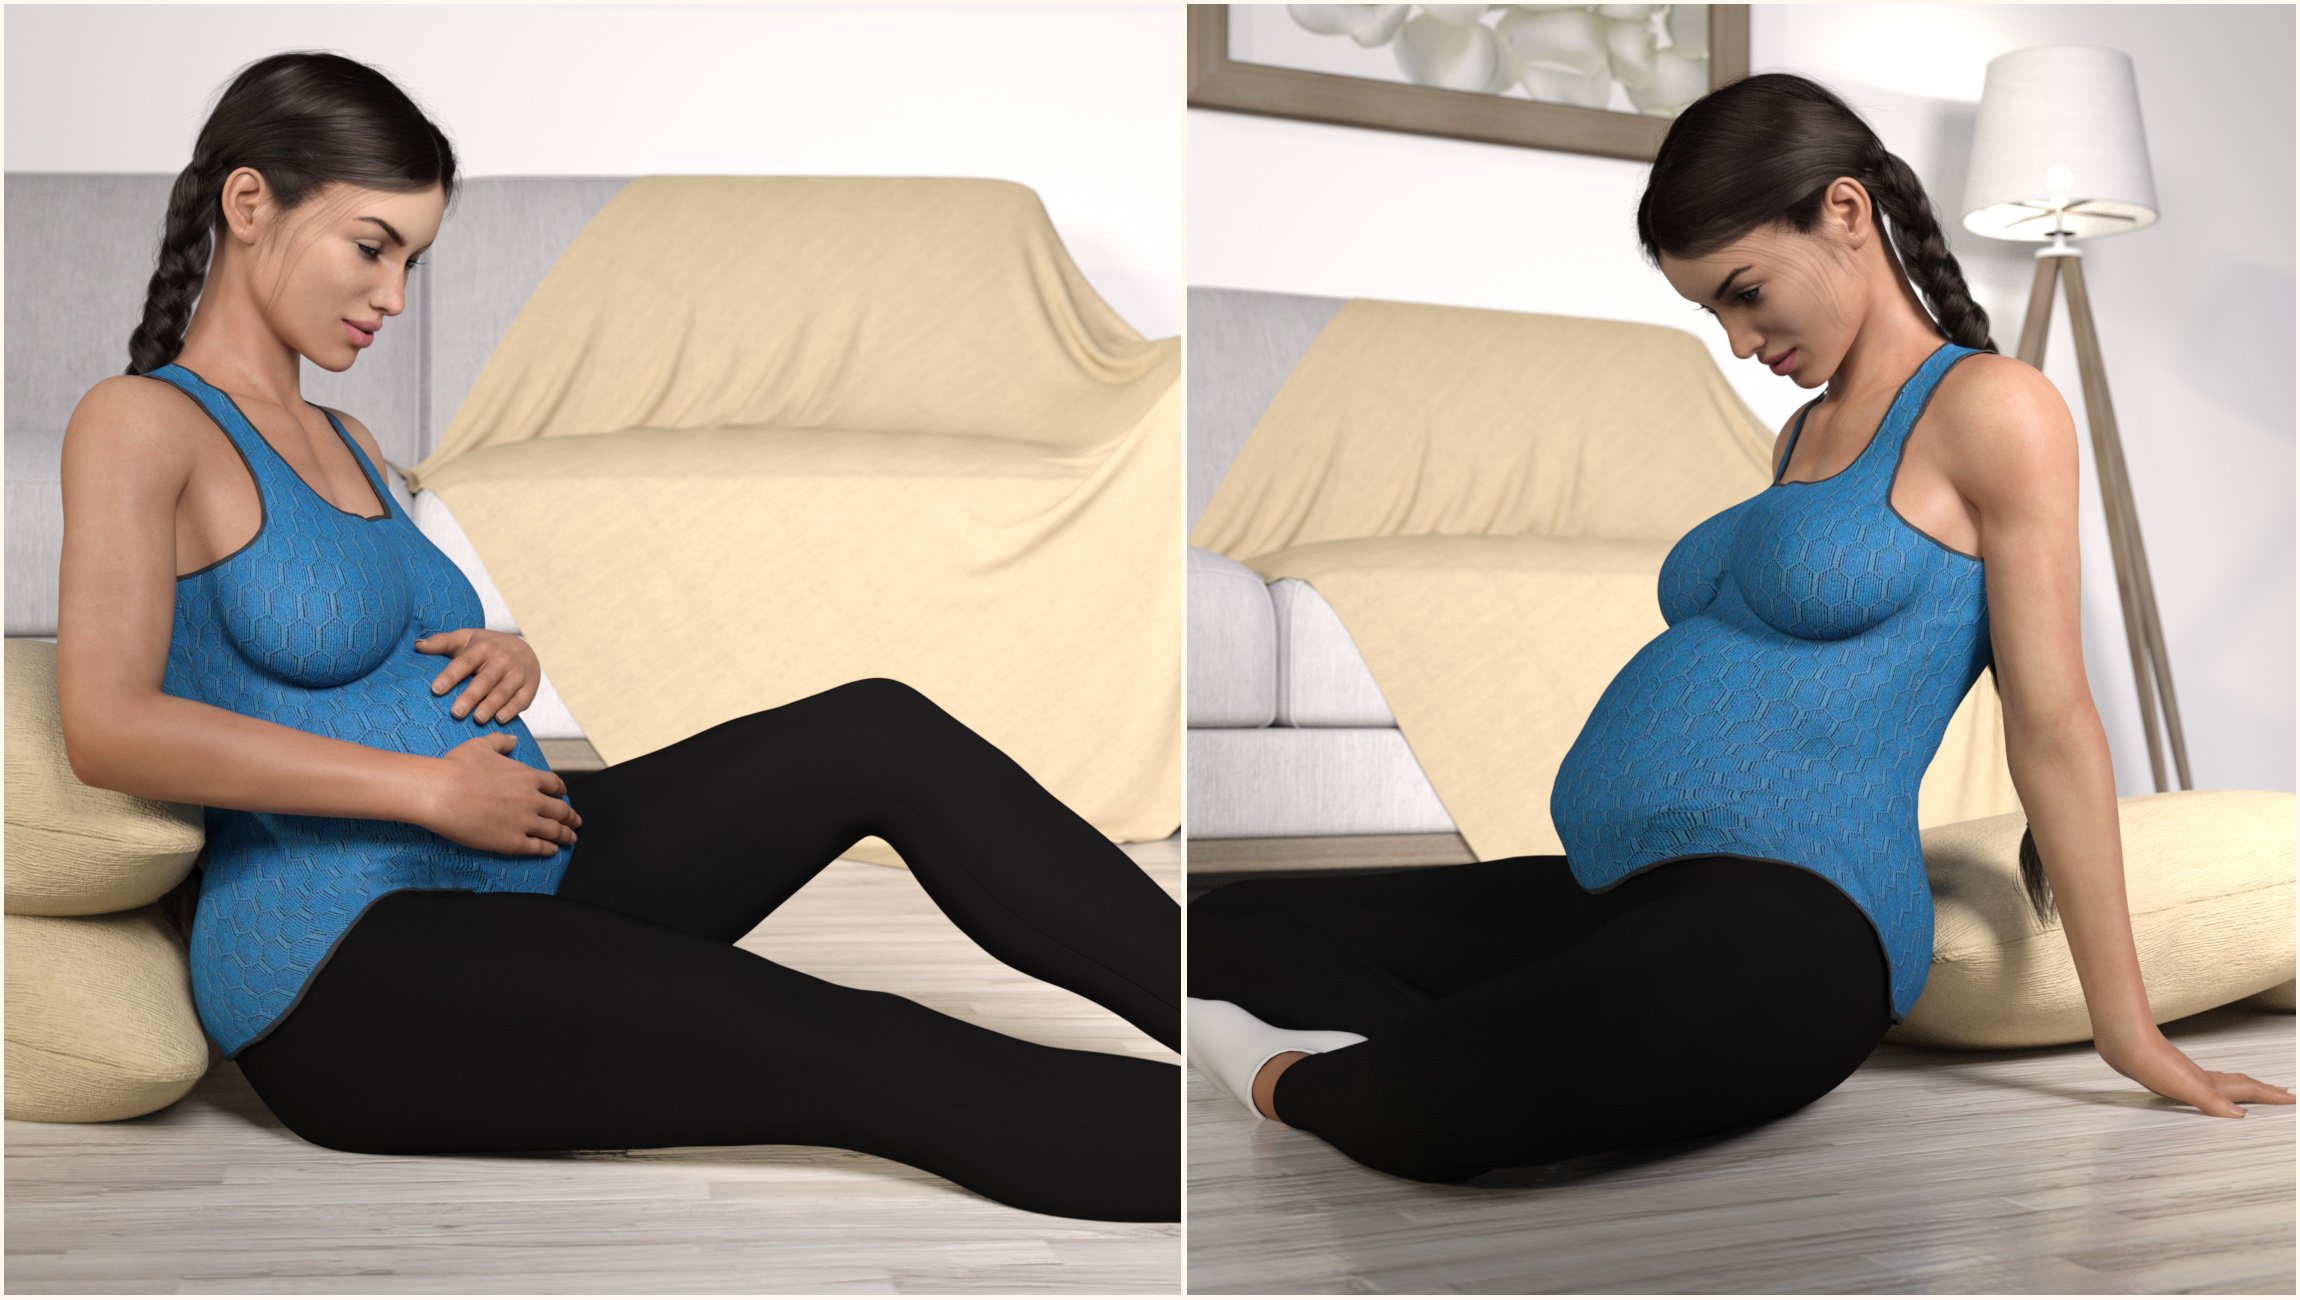 Z Expecting - Pregnancy Preset and Poses for Genesis 3 and 8 by: Zeddicuss, 3D Models by Daz 3D